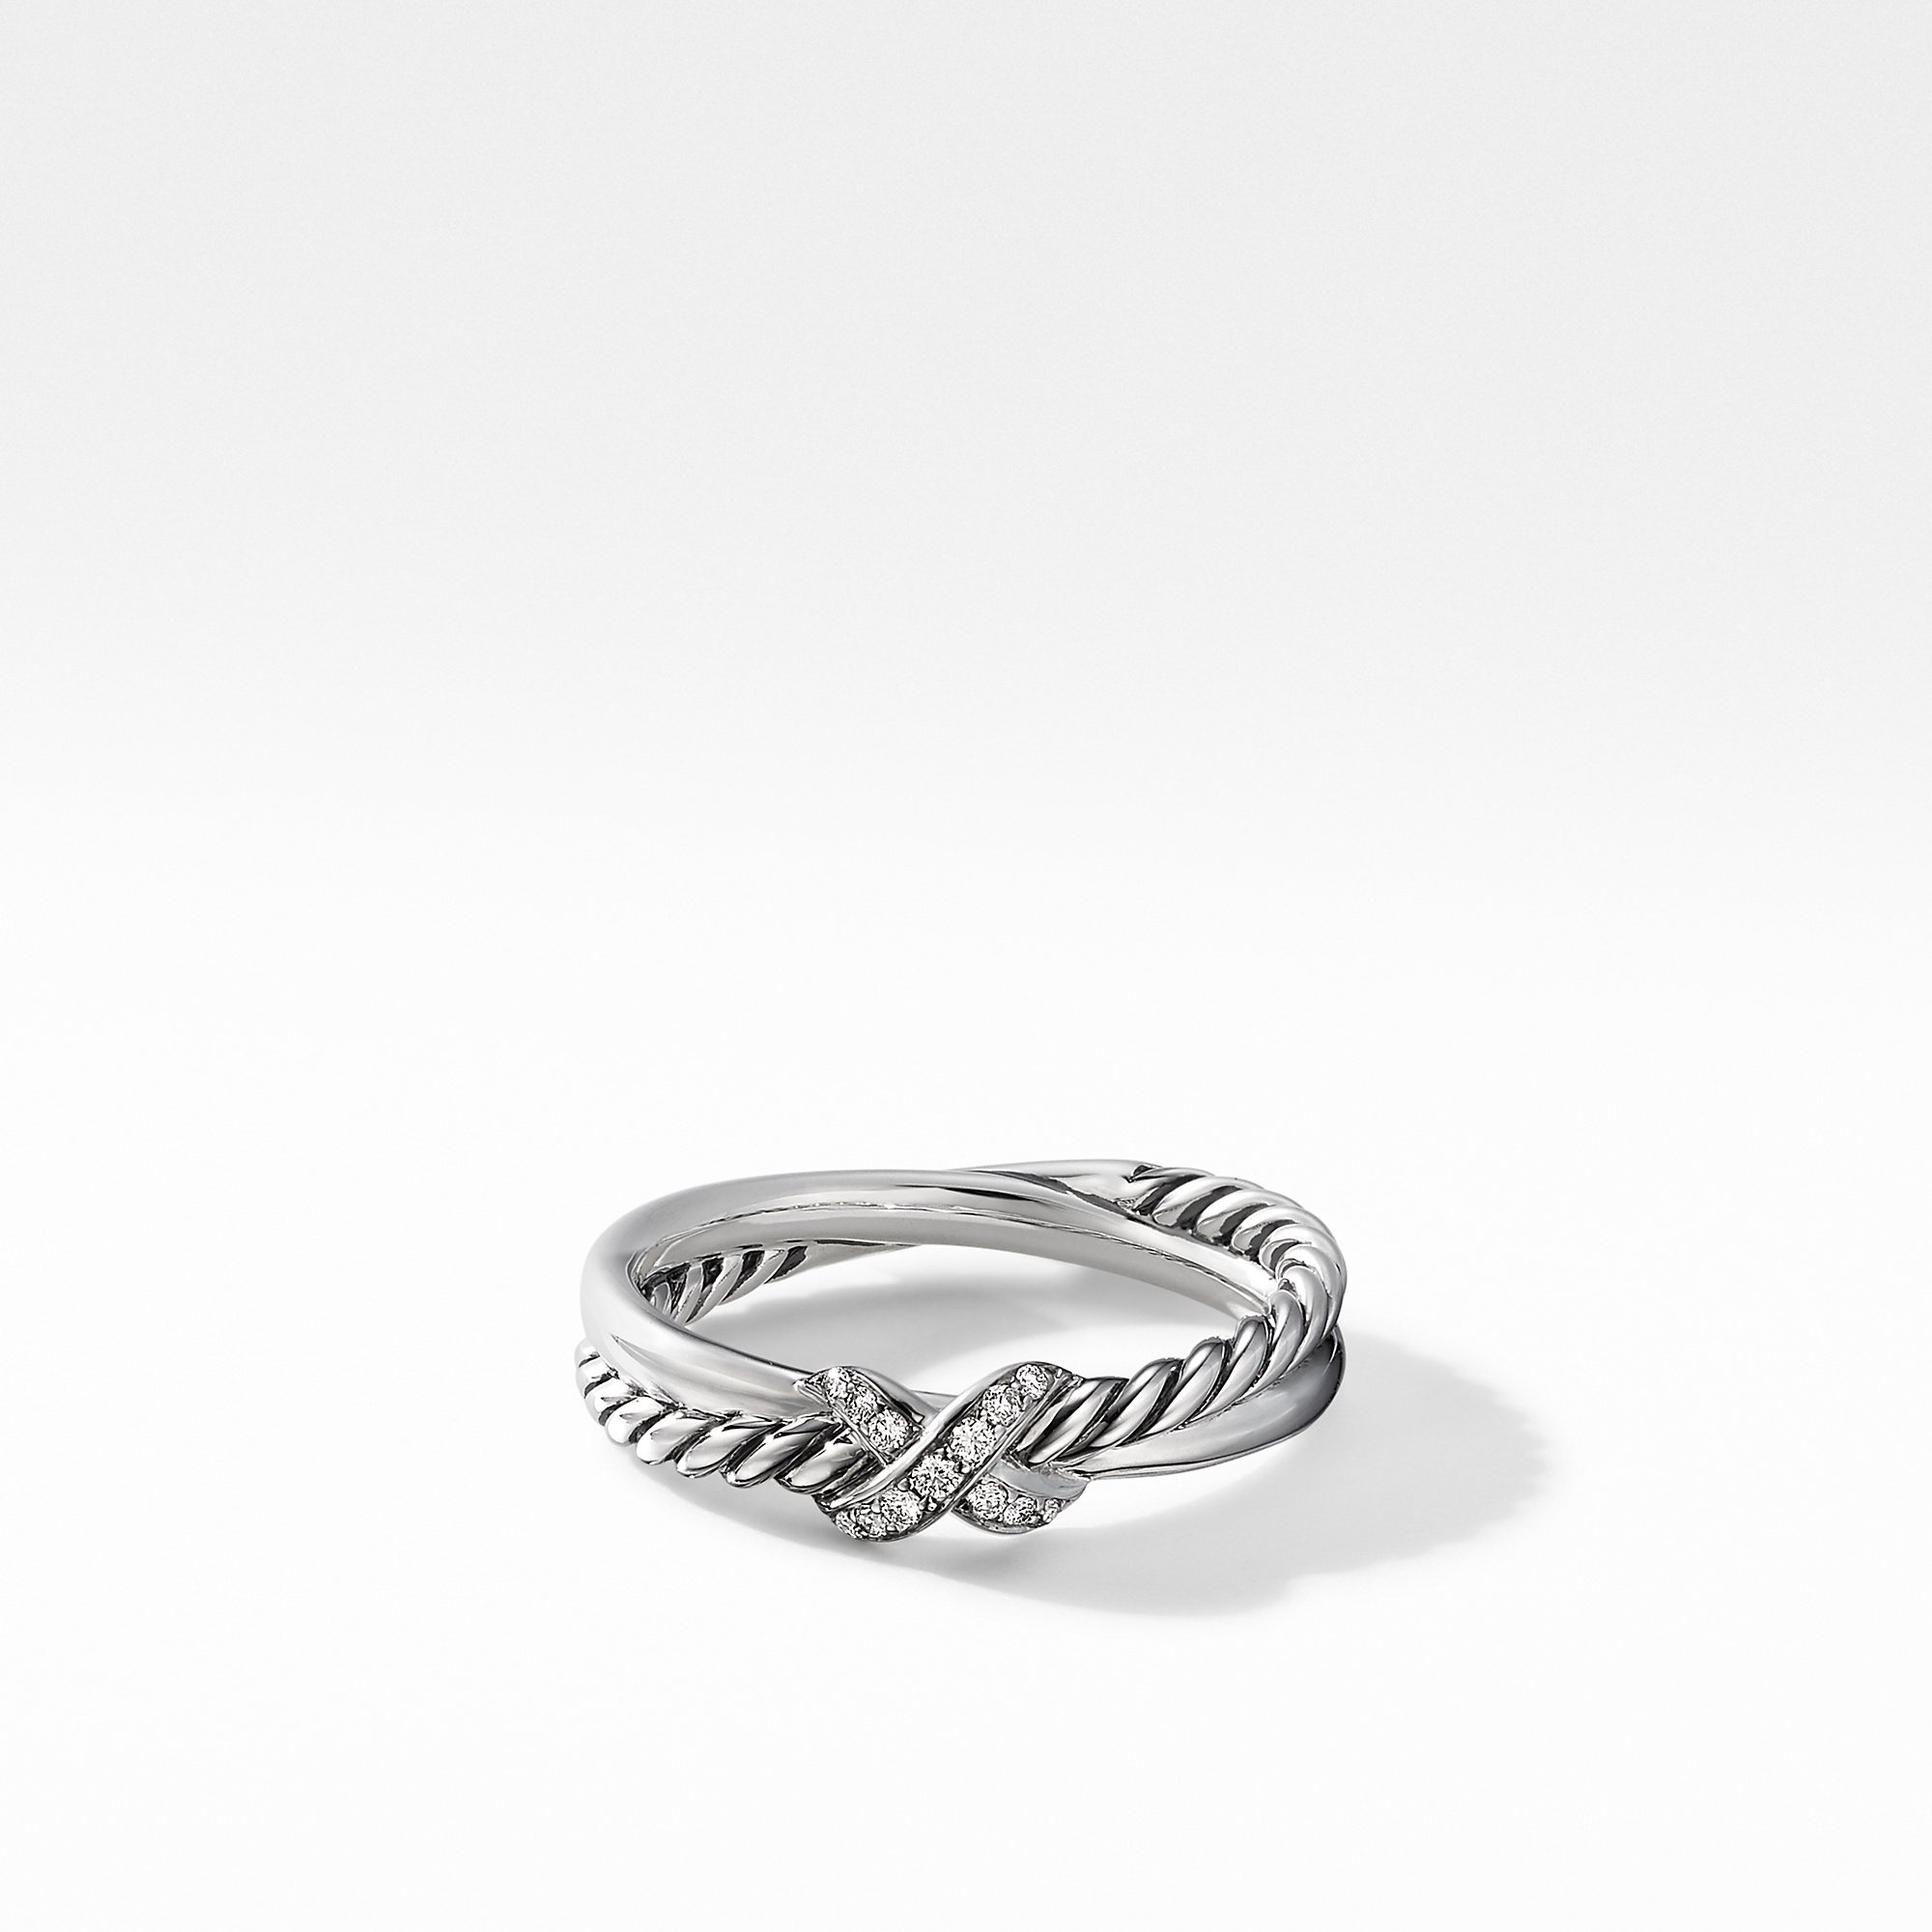 Petite X Ring in Sterling Silver with Pave Diamonds